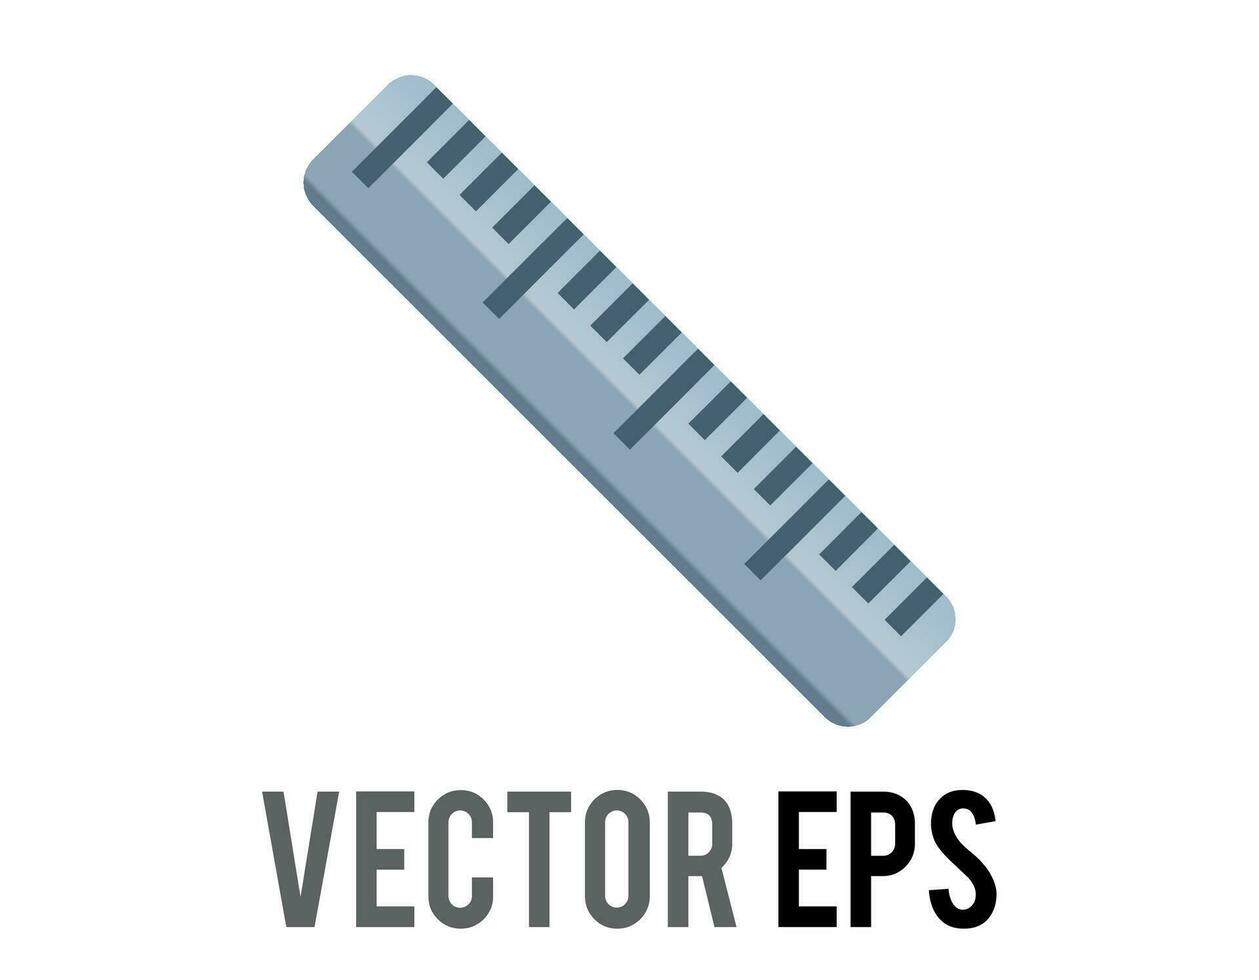 vector silver metal straight ruler icon, as used to draw lines and measure distance